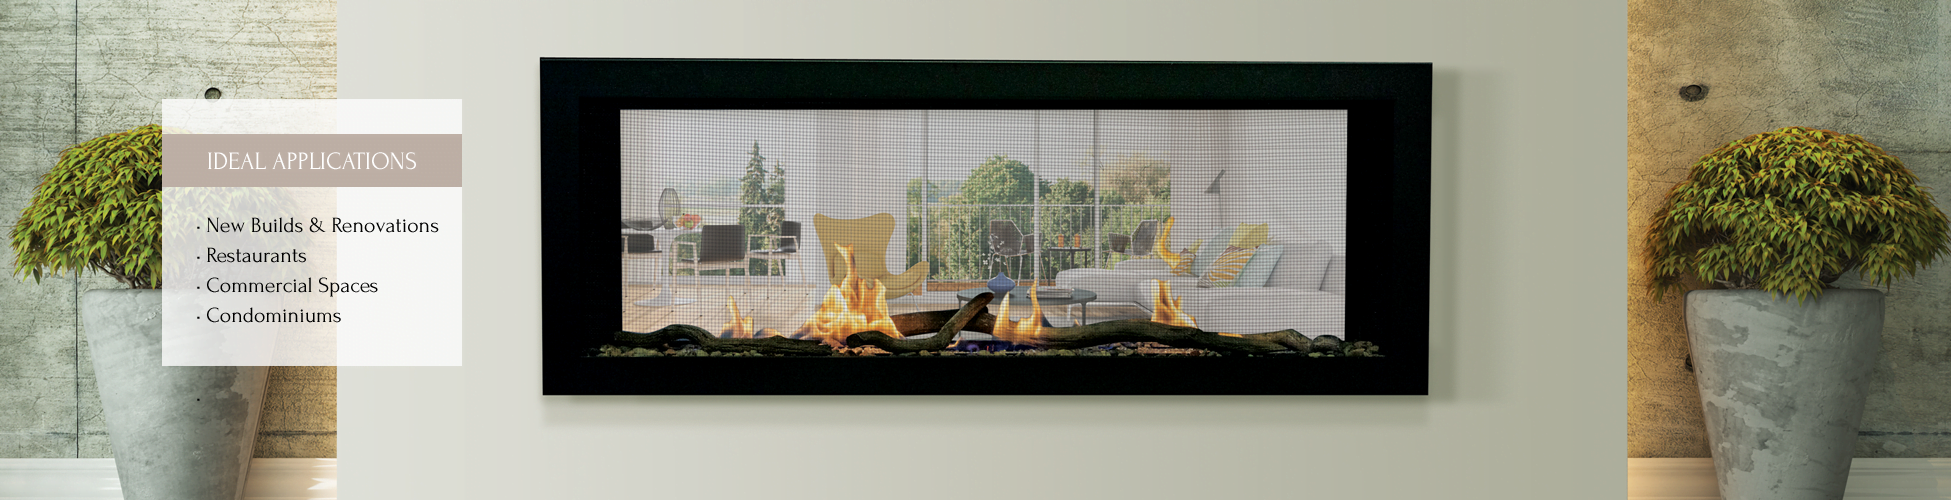 Emerson gas fireplace by Sierra Flame